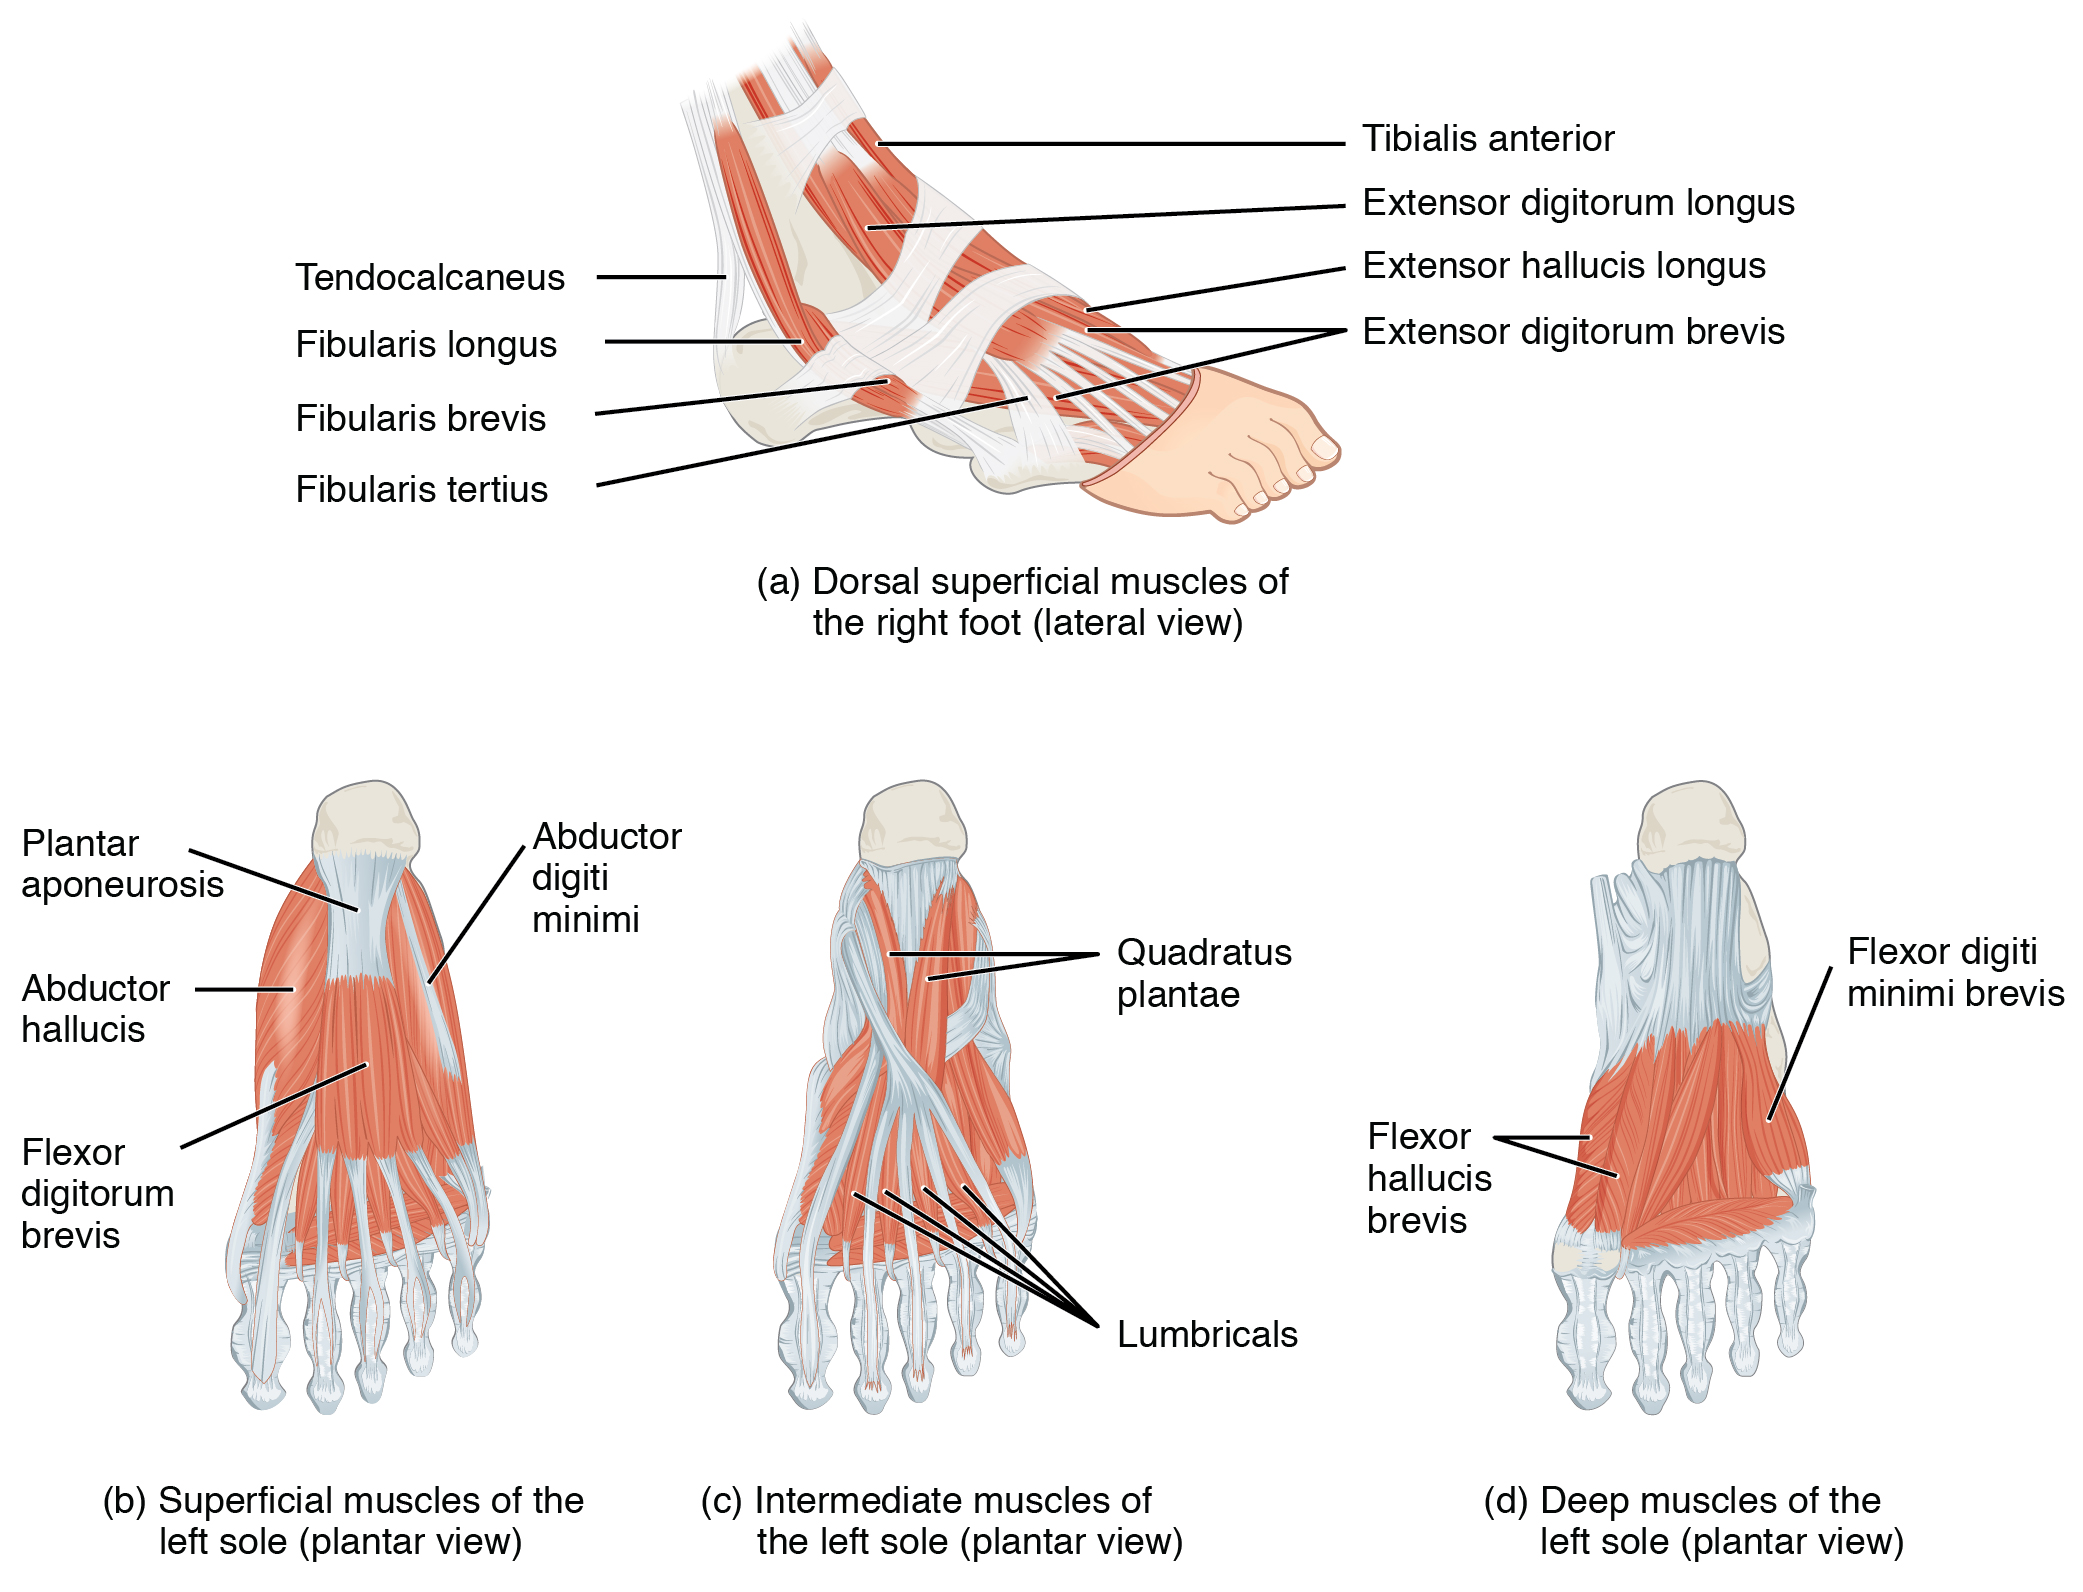 This figure shows the muscles of the foot. The top panel shows the lateral view of the dorsal muscles. The bottom left panel shows the superficial muscles of the left sole, the center panel shows the intermediate muscles of the left sole, and the right panel shows the deep muscles of the left sole.